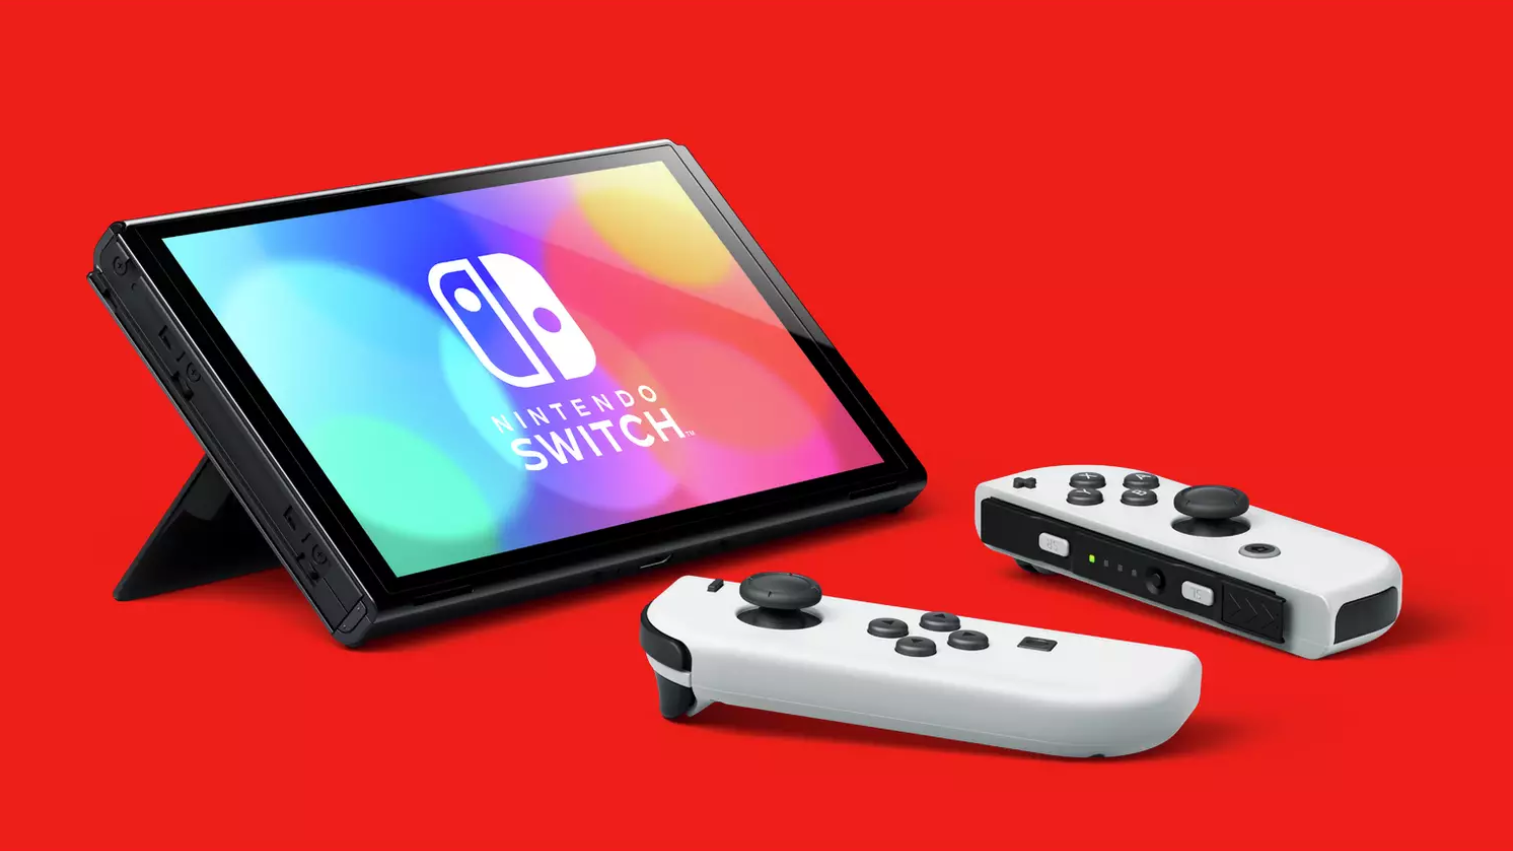 Users, Nintendo Switch Support